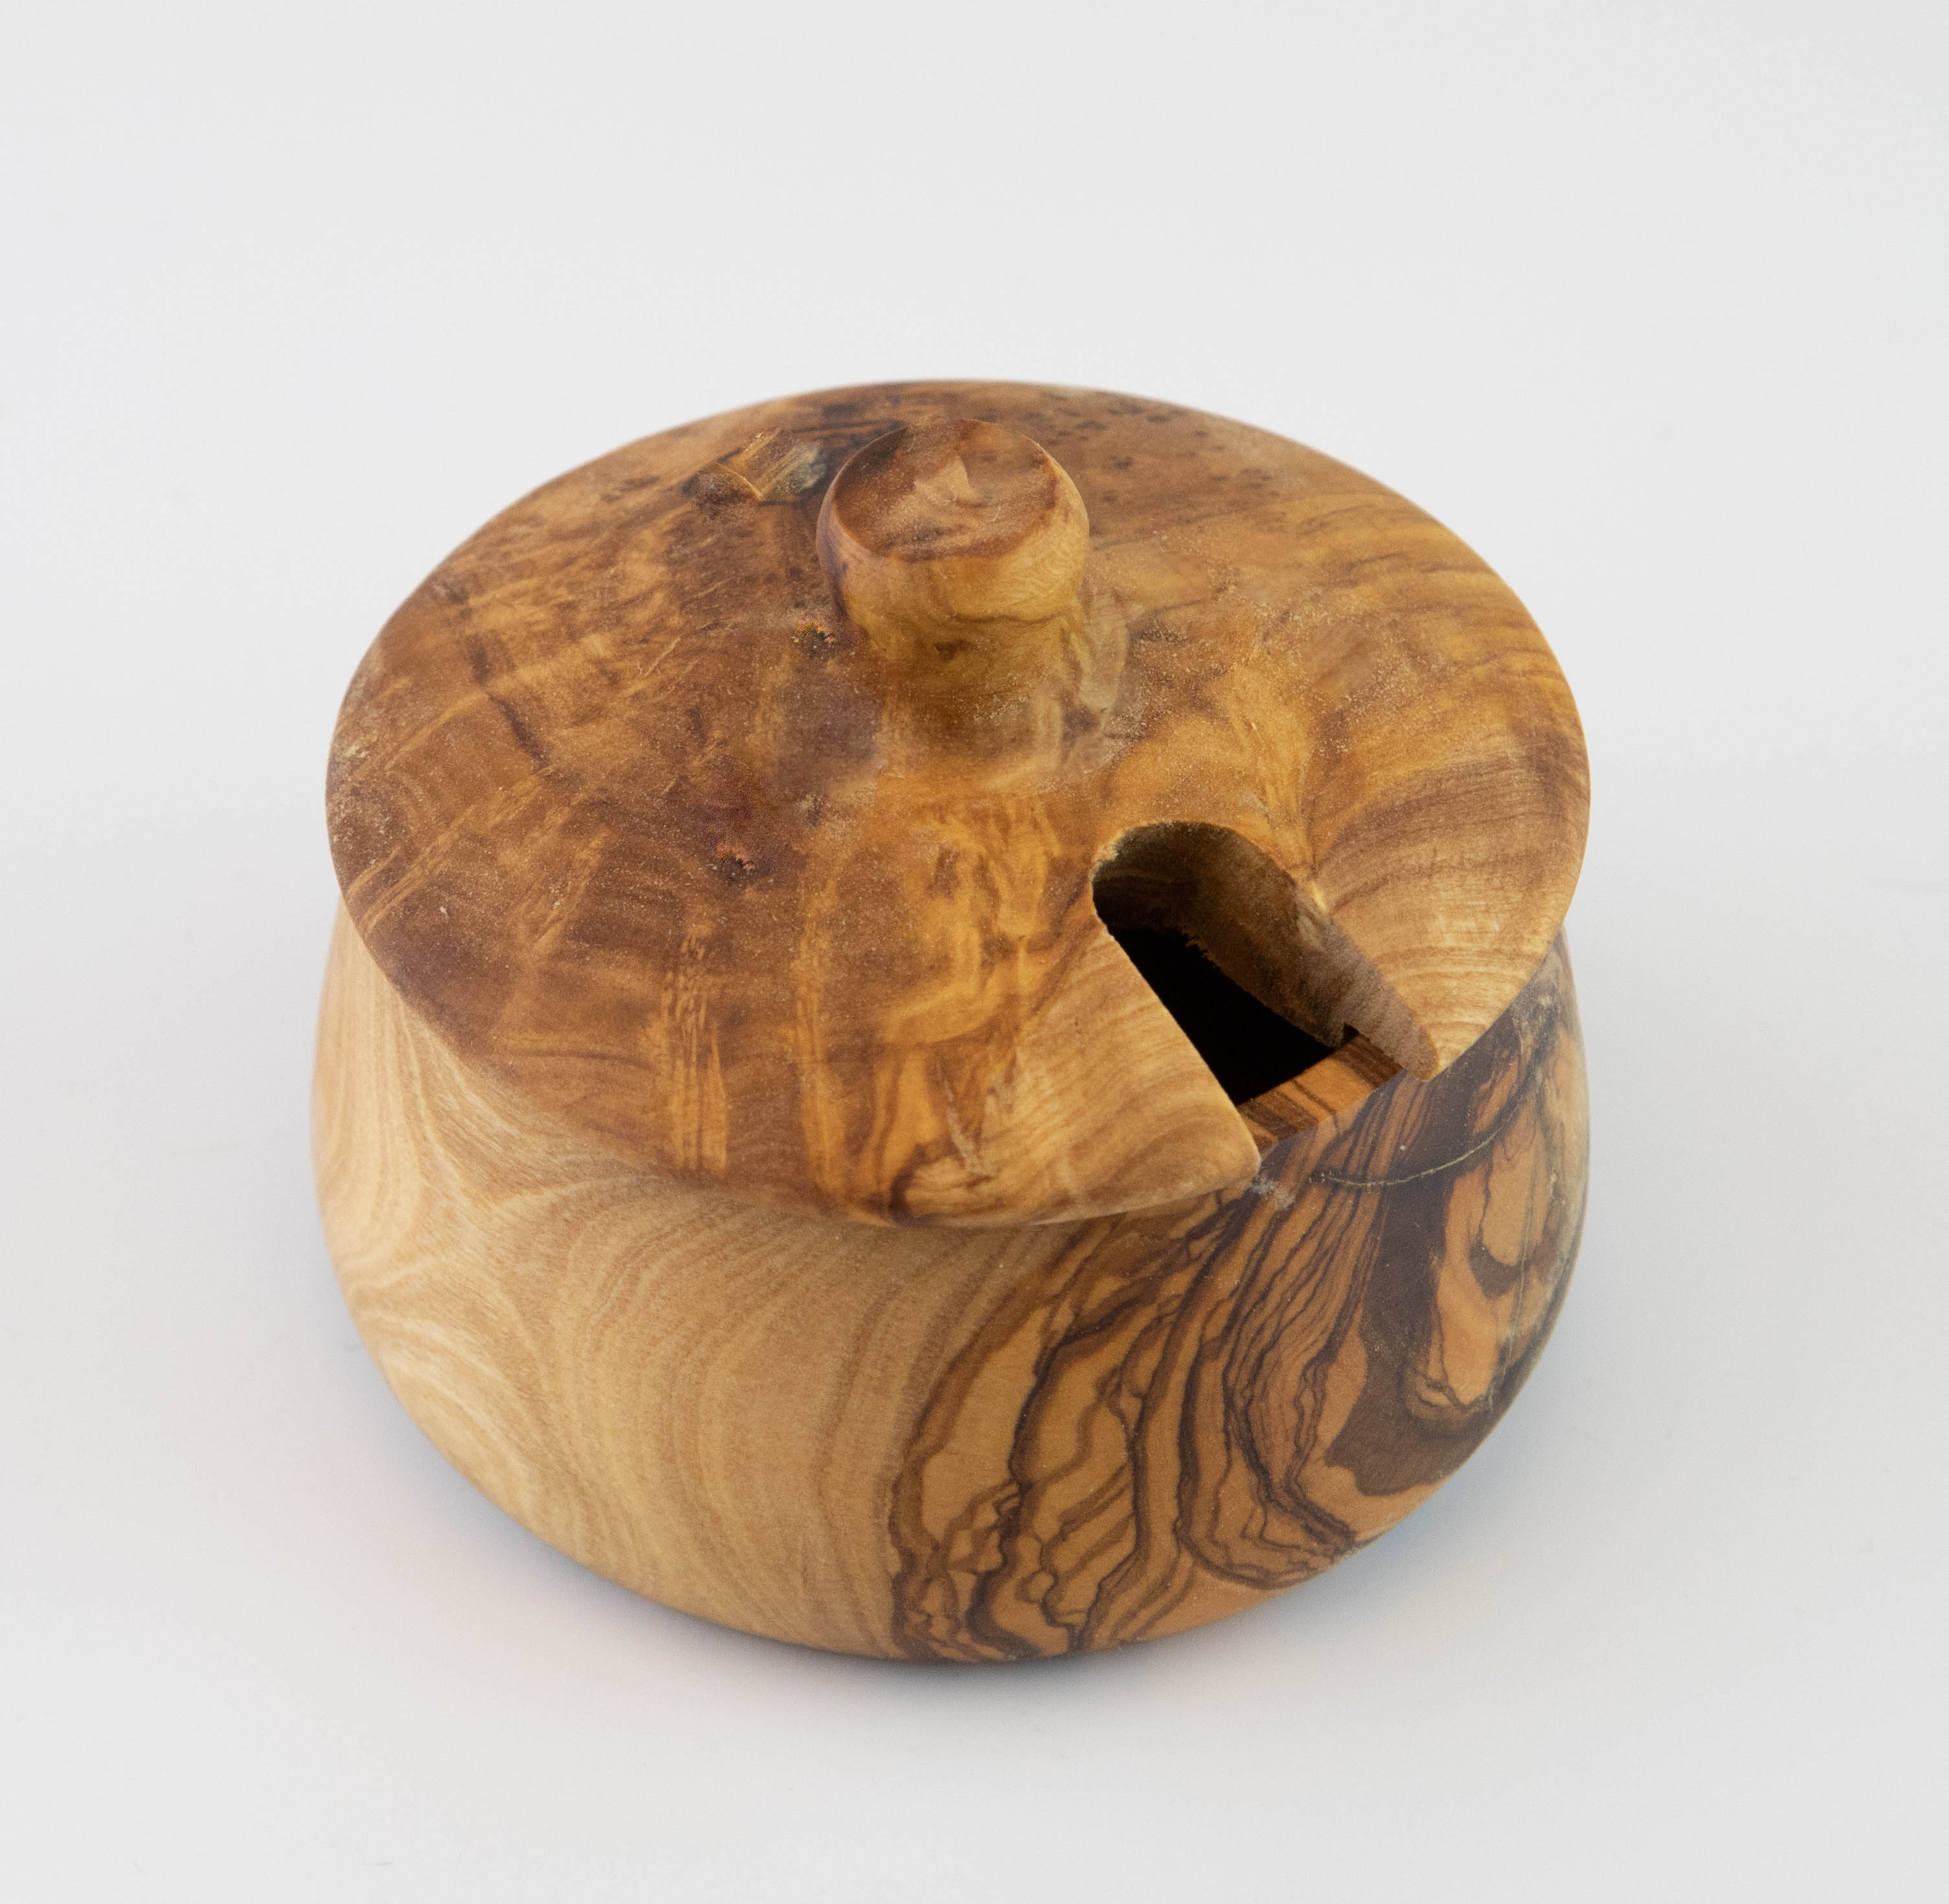 Sugar bowl made of olive wood with button lid.